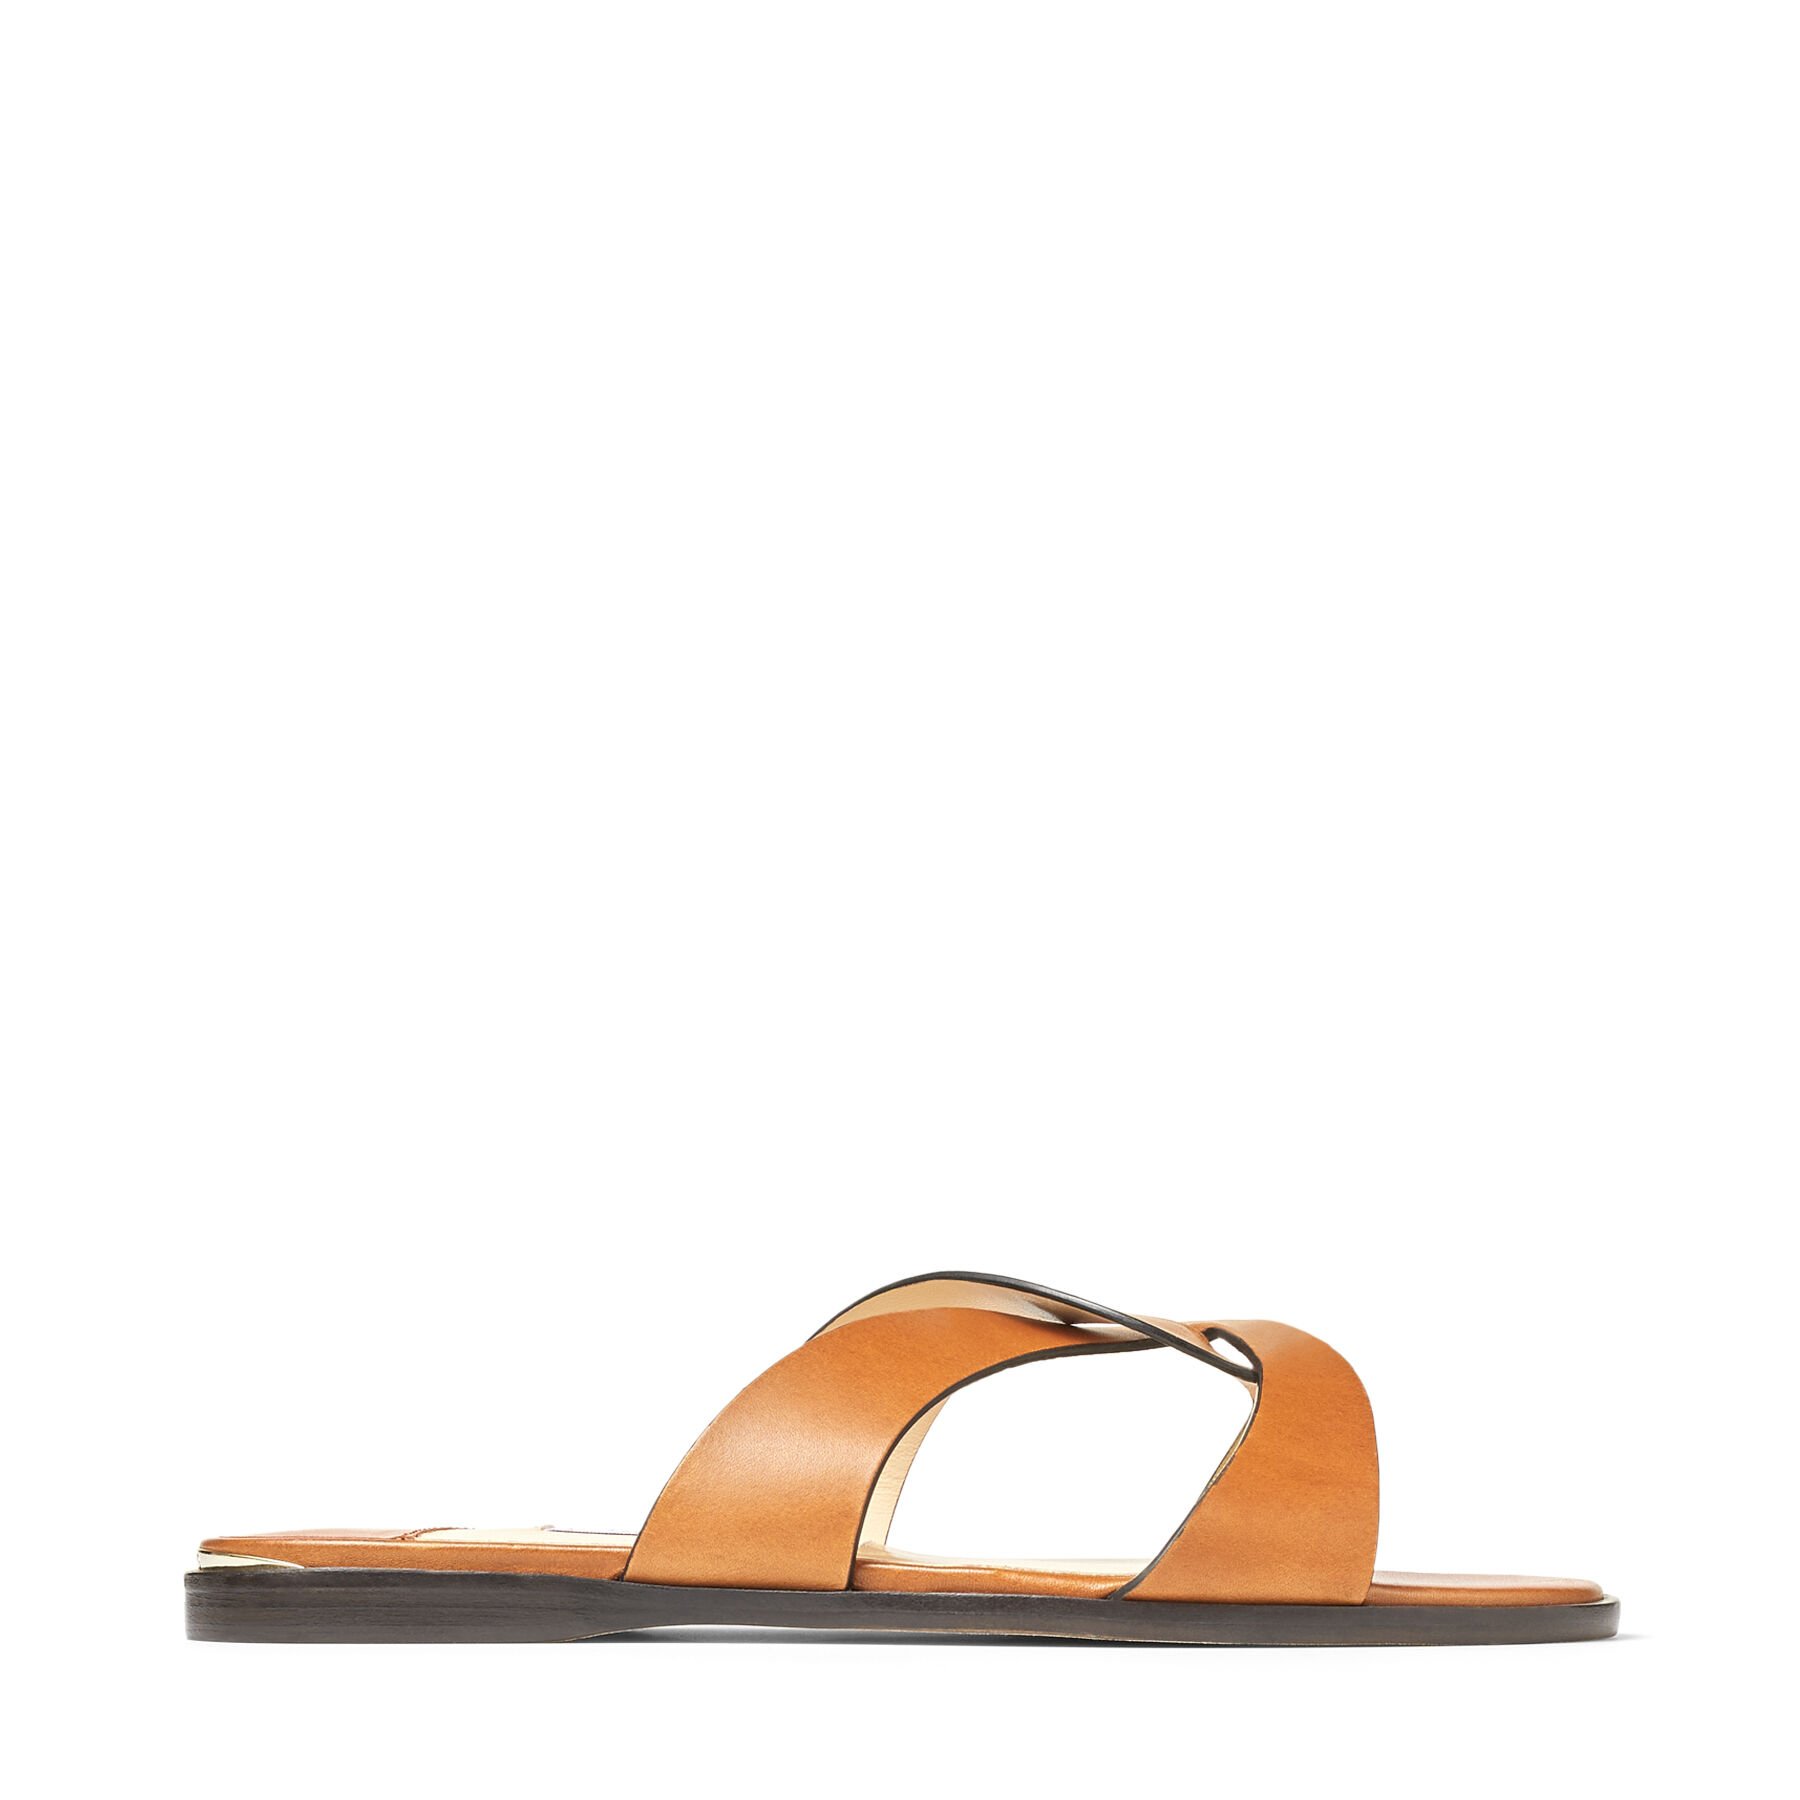 Cuoio Vachetta Leather Flat Sandals with Crossover Straps | ATIA FLAT ...